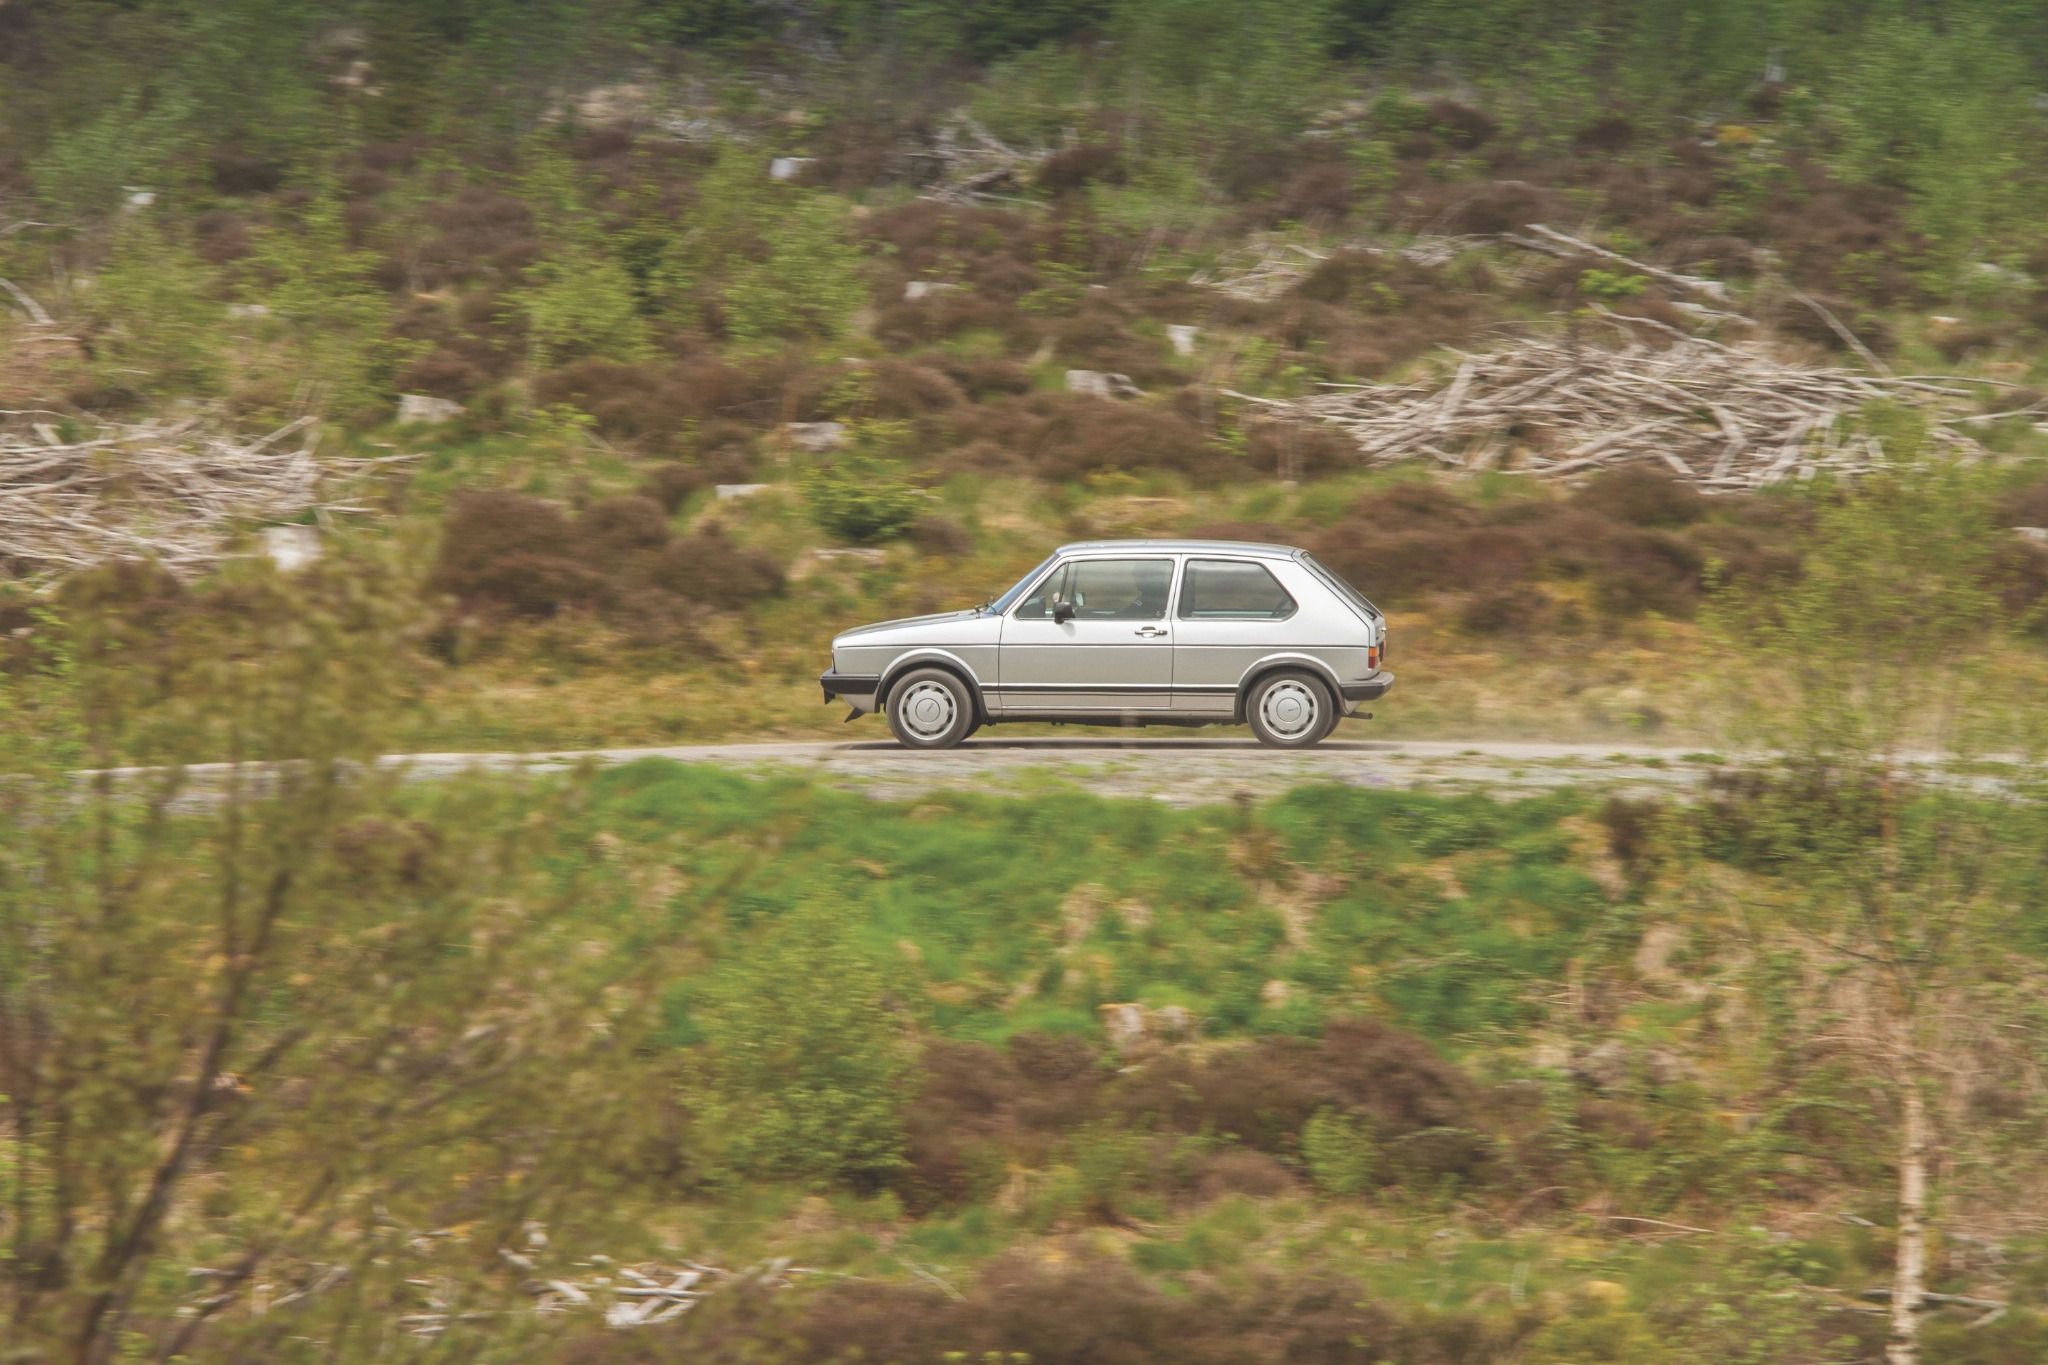 Side view of an MK1 Volkswagen Golf GTI driving on a road with grass either side